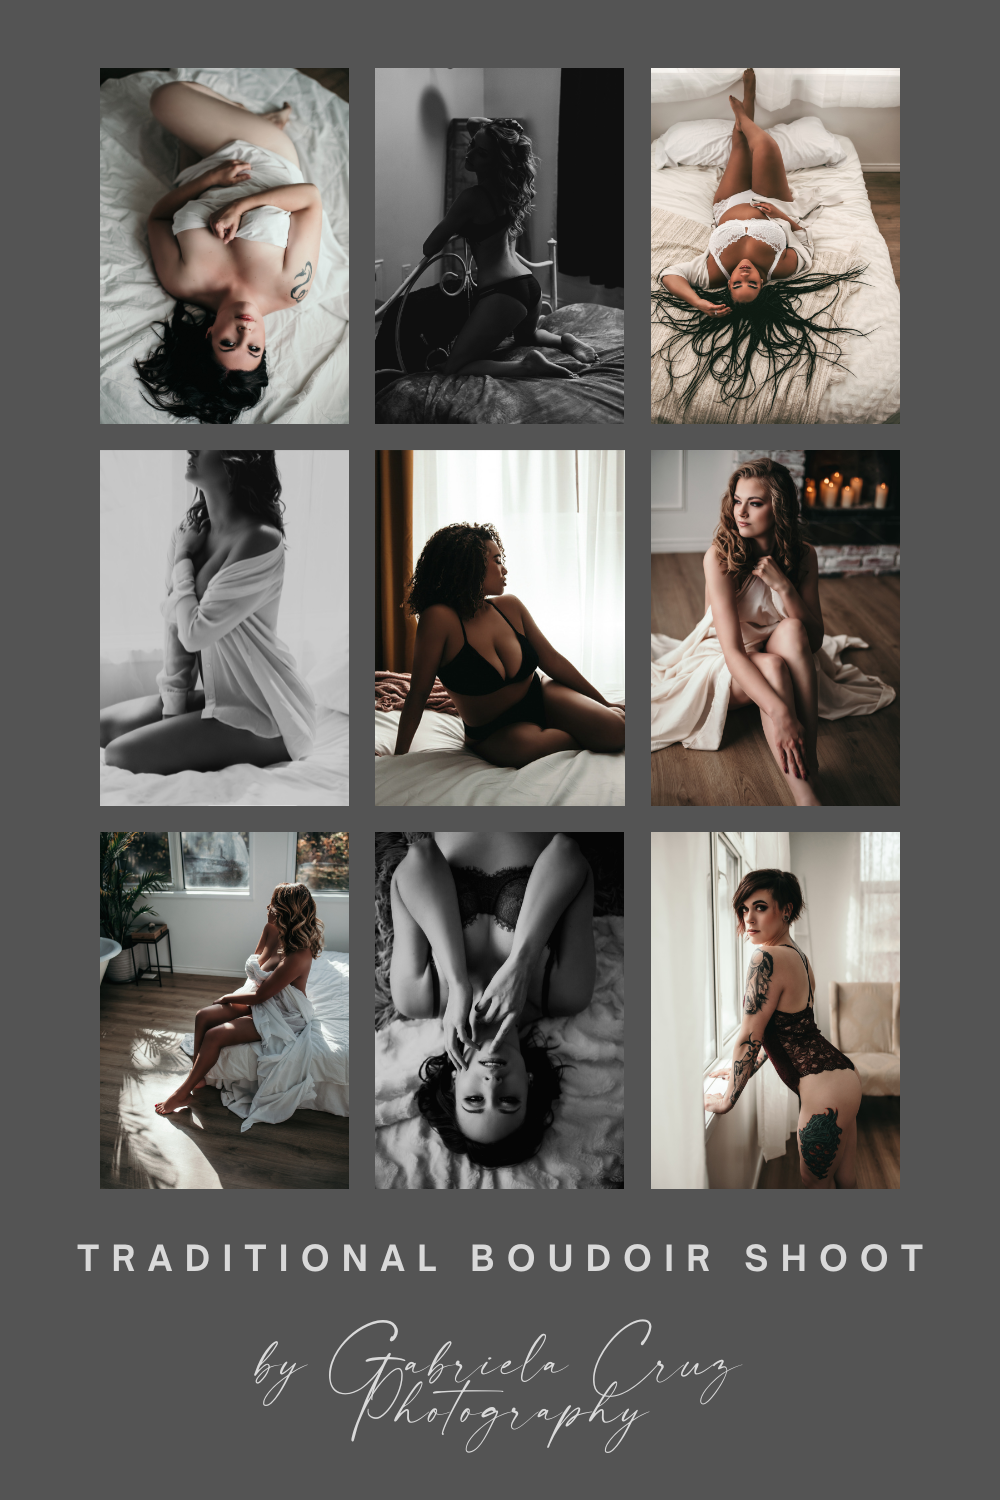 Planning a traditional boudoir shoot but not sure where to start? The experts at Gabriela Cruz Photography have you covered.